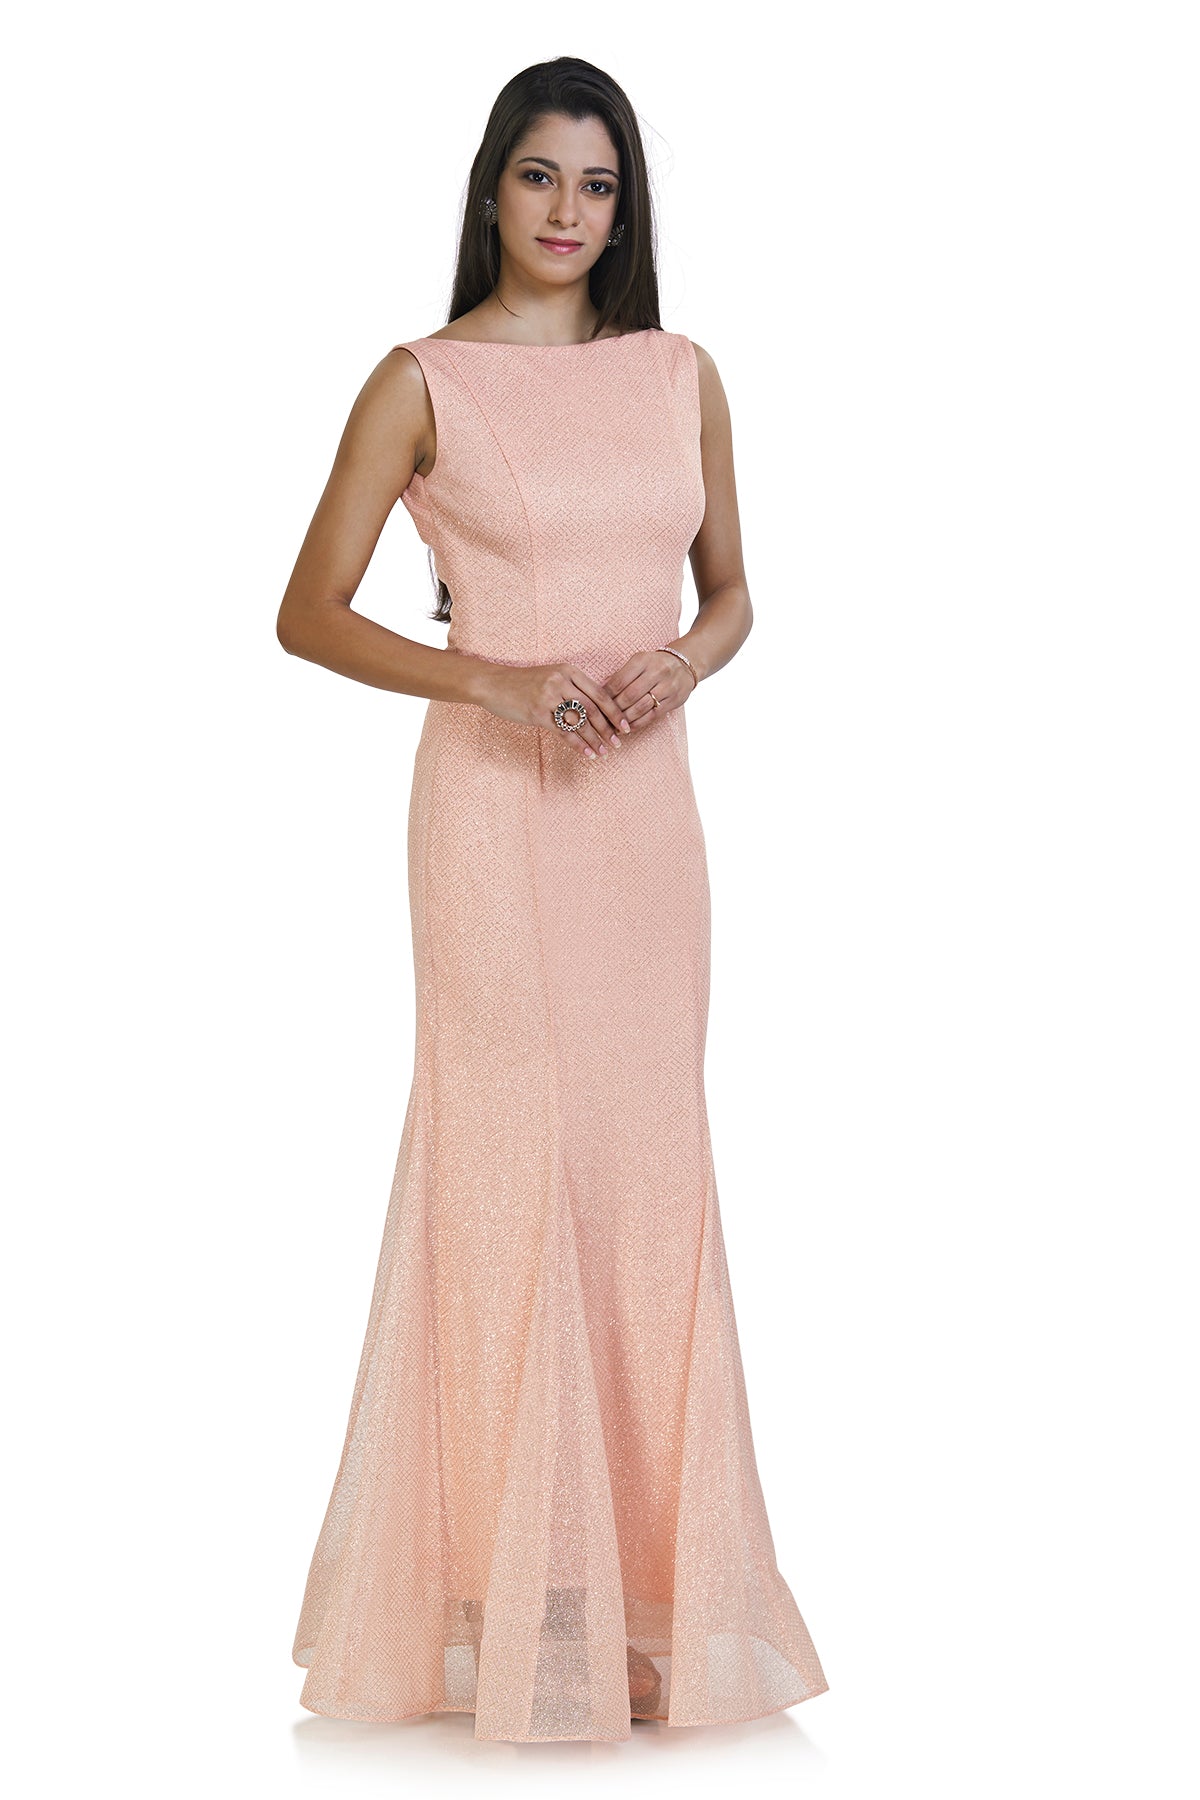 Get the party started with this classy baby pink gown and sparkle all through the night.